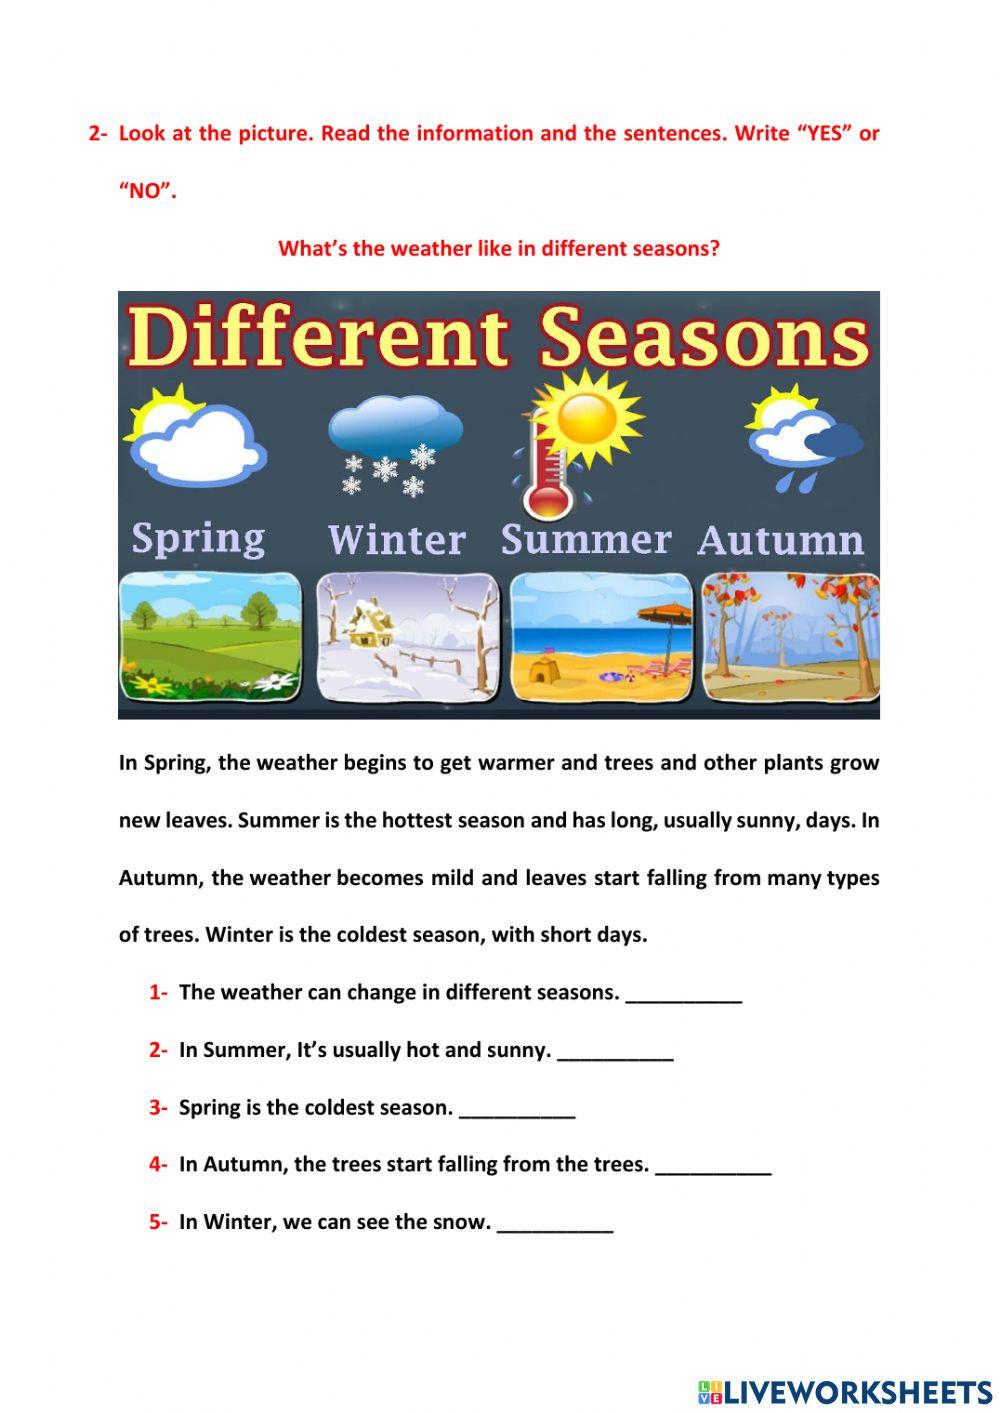 Weather in different seasons